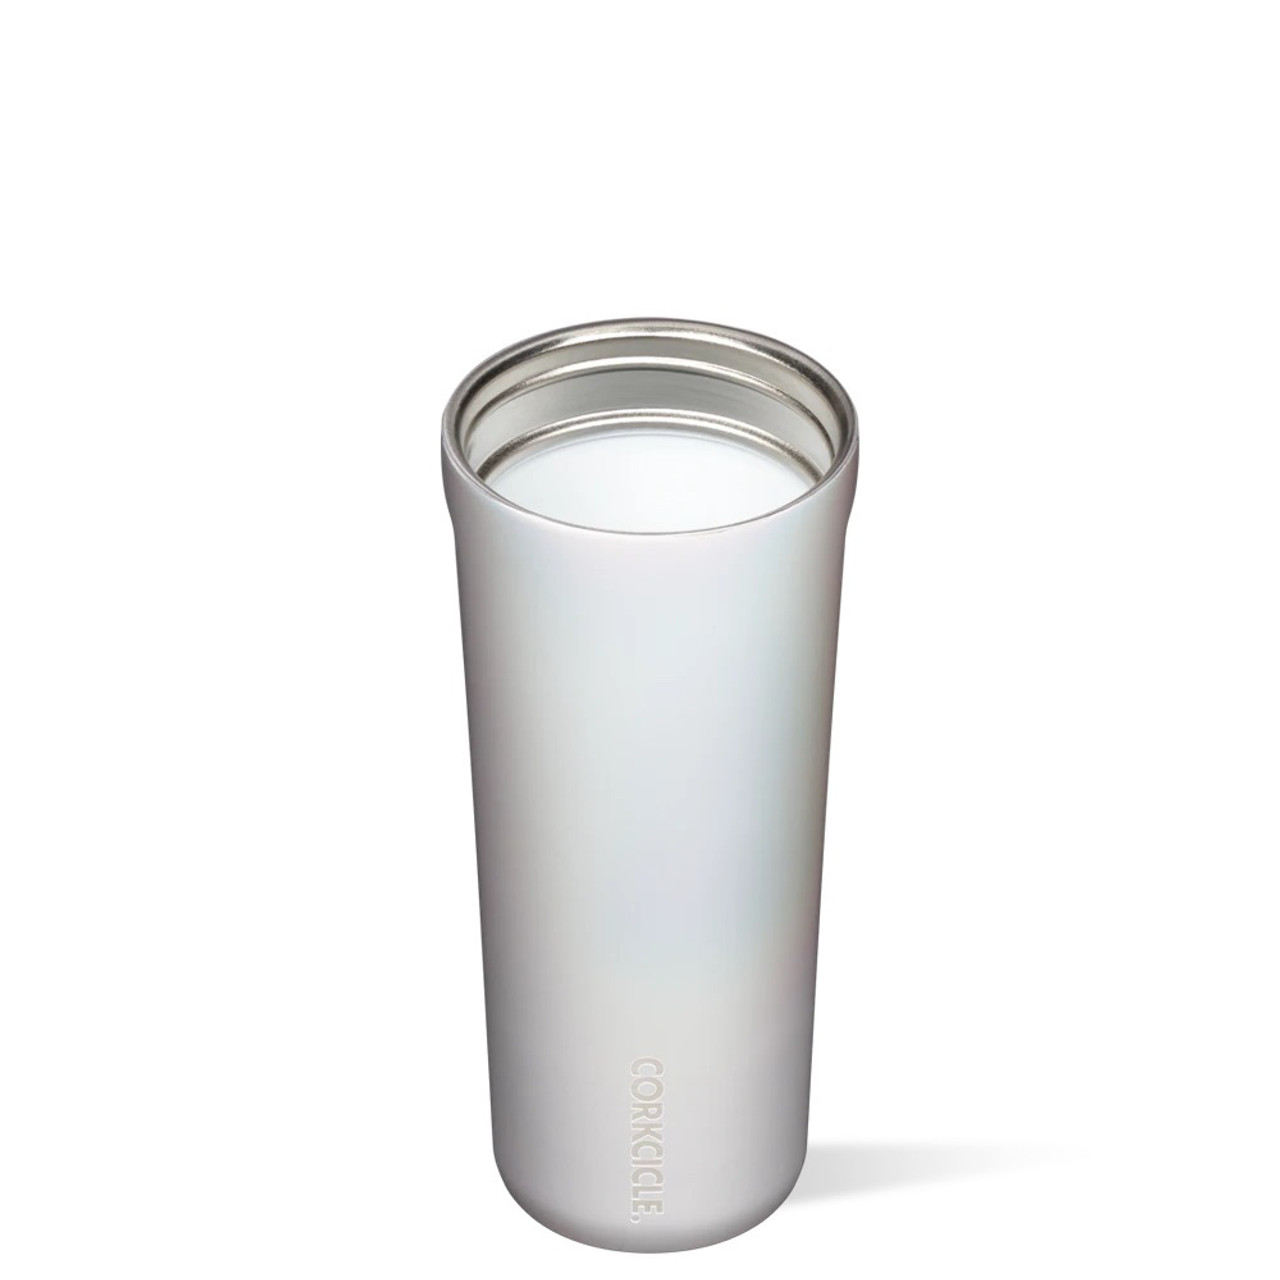 https://cdn11.bigcommerce.com/s-6zwhmb4rdr/images/stencil/1280x1280/products/73617/194671/the-lamp-stand-corkcicle-17oz-prismatic-commuter-cup-2817ep-4__31992.1643860300.jpg?c=1